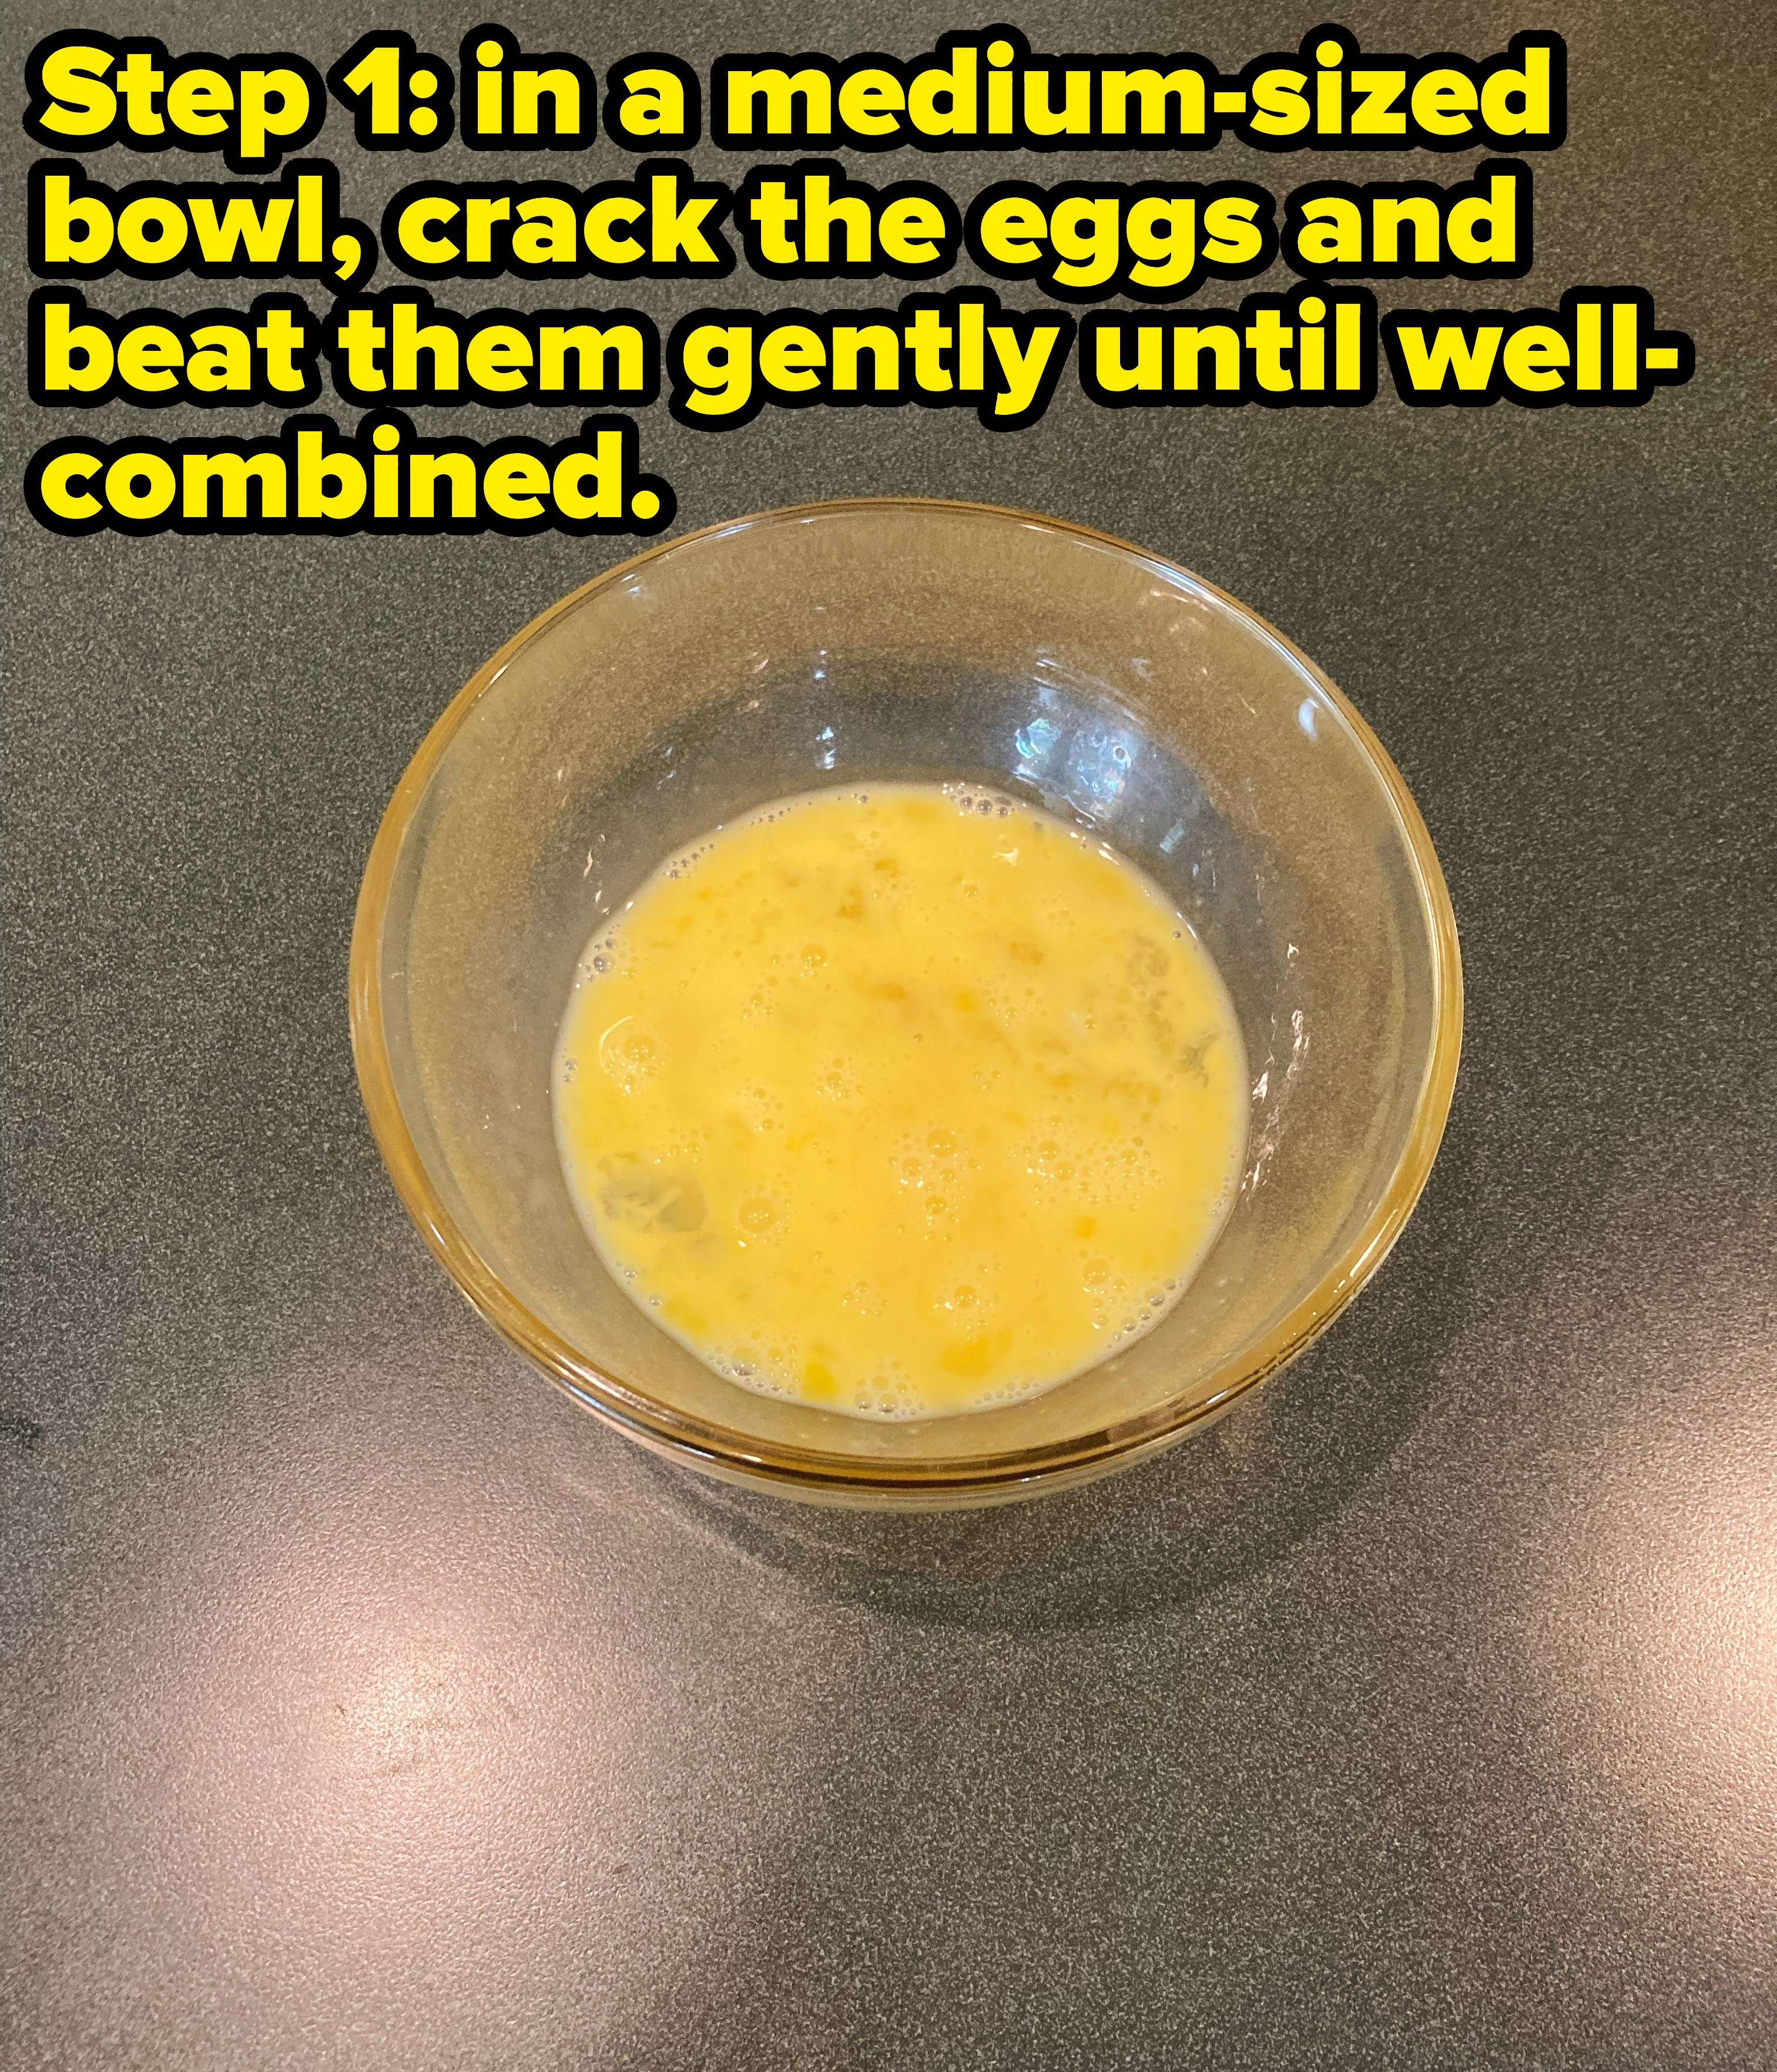 photo of step 1 with the the words &quot;in a medium-sized bowl, crack the eggs and beat them gently until well-combined&quot;